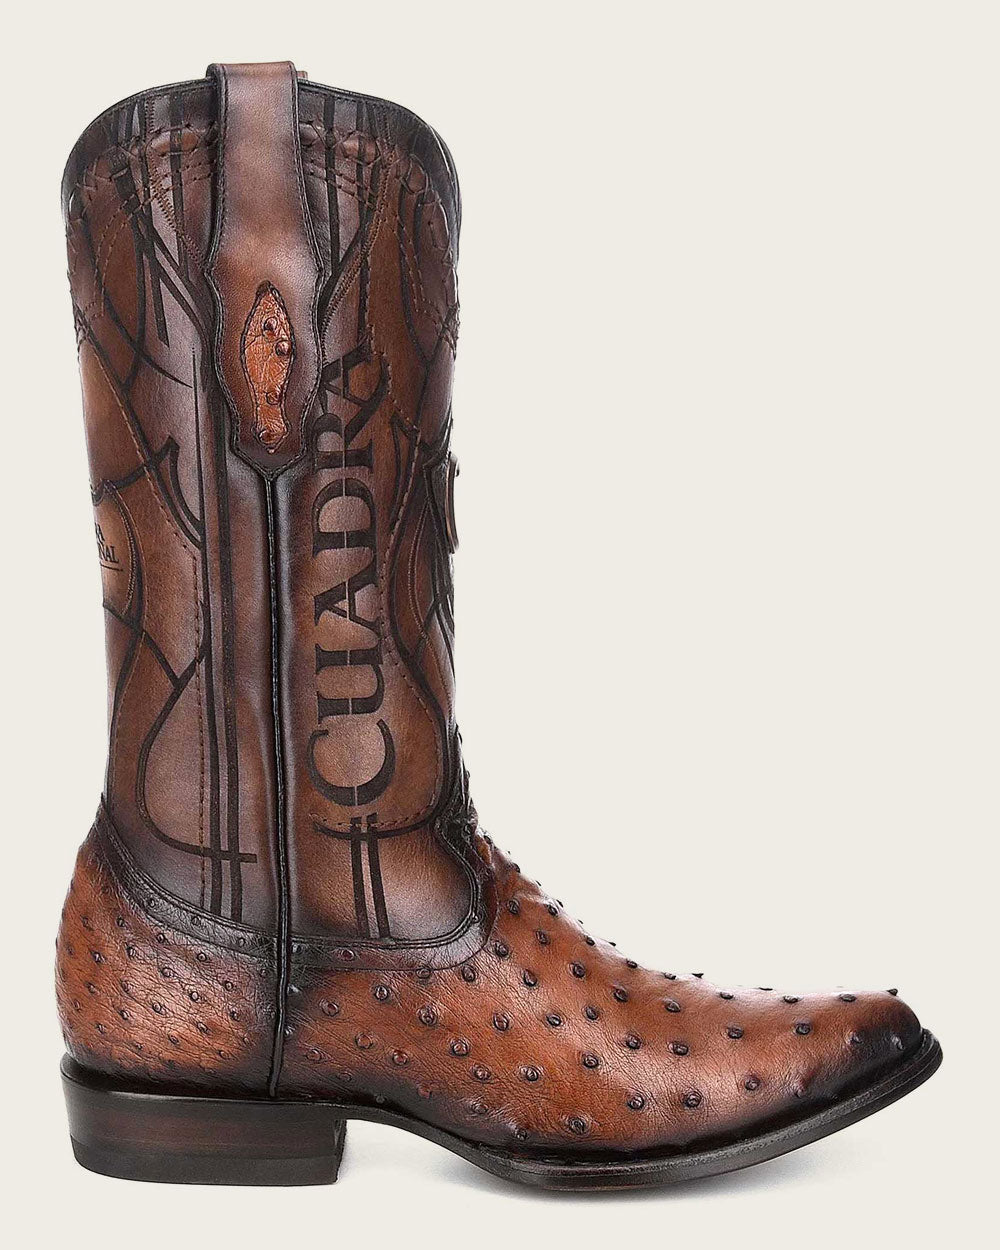 Removable Insole for Comfort: Brown cowboy boots offer a removable insole for personalized comfort.